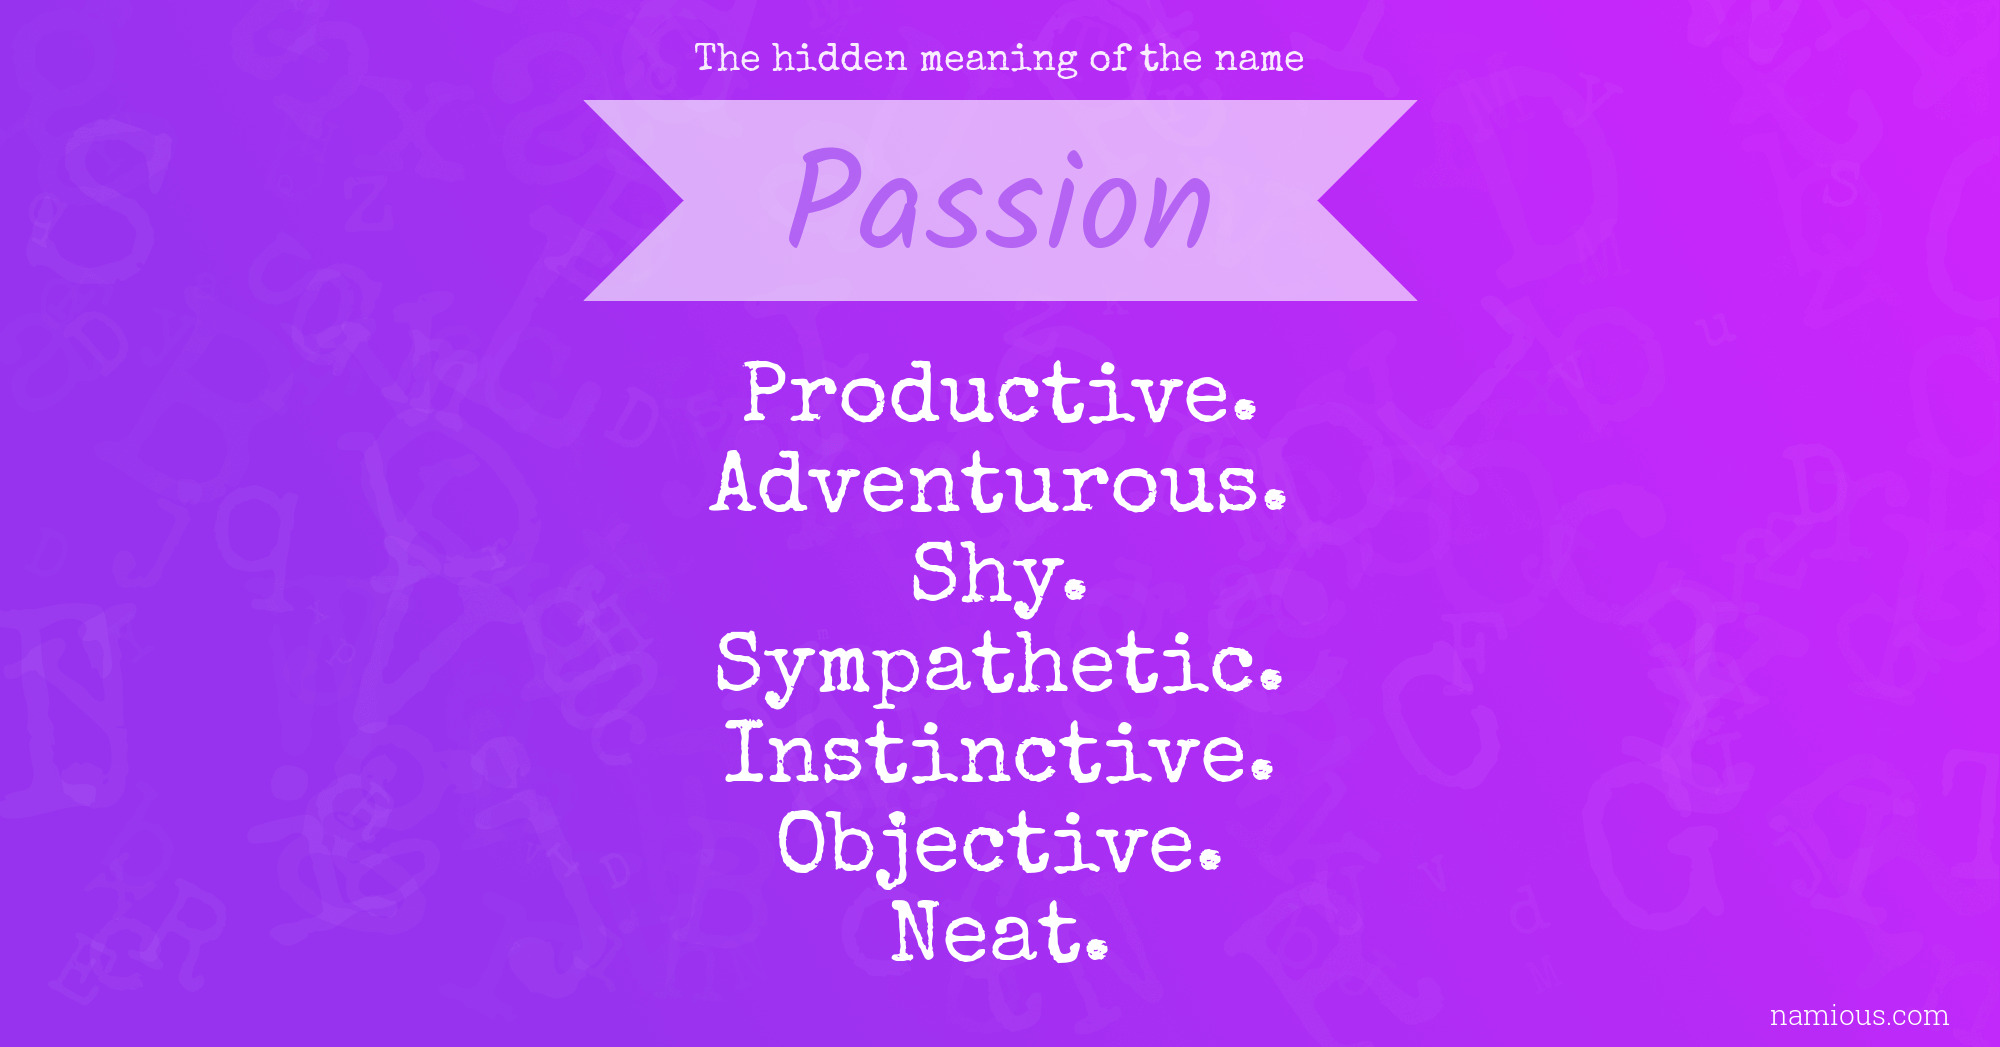 The hidden meaning of the name Passion | Namious